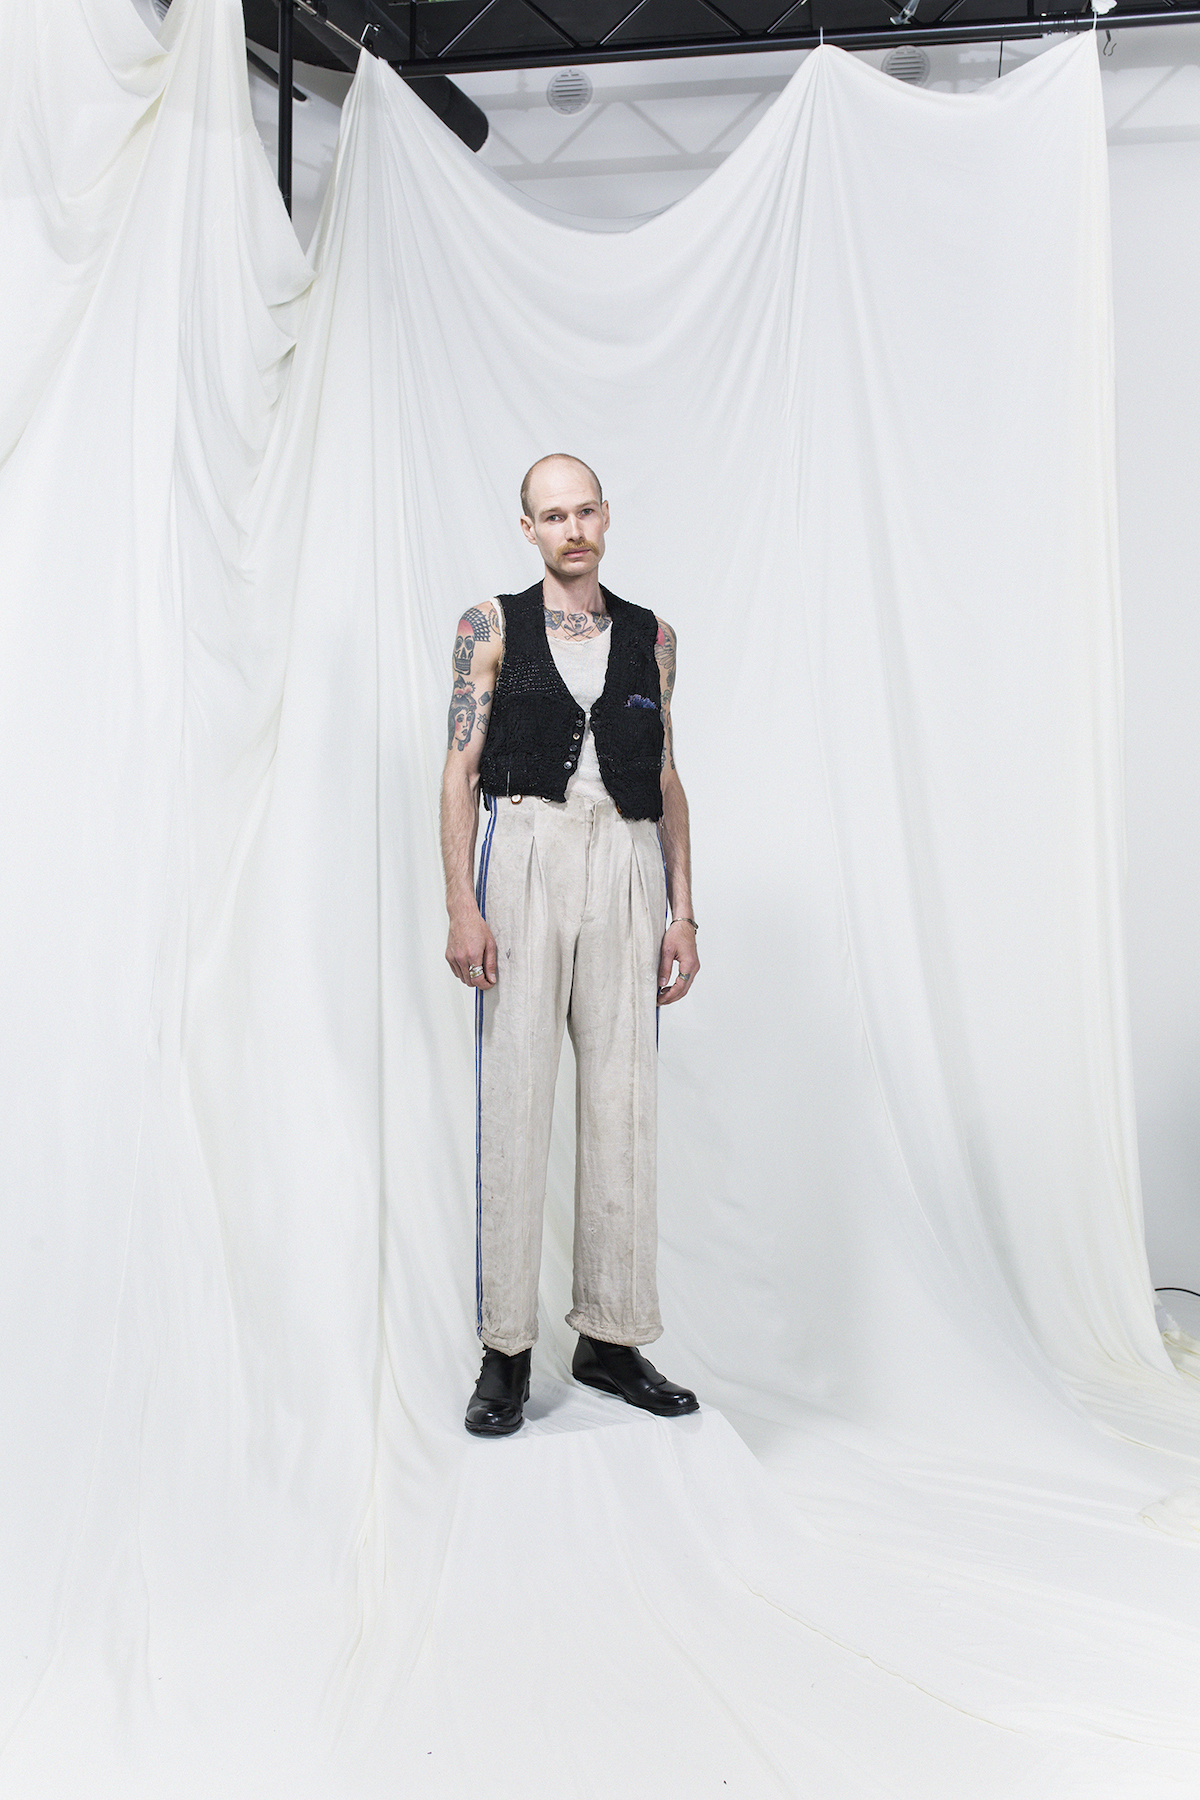 Model is wearing a white tank top, black vest and oversized trousers with blue stripes and suspenders